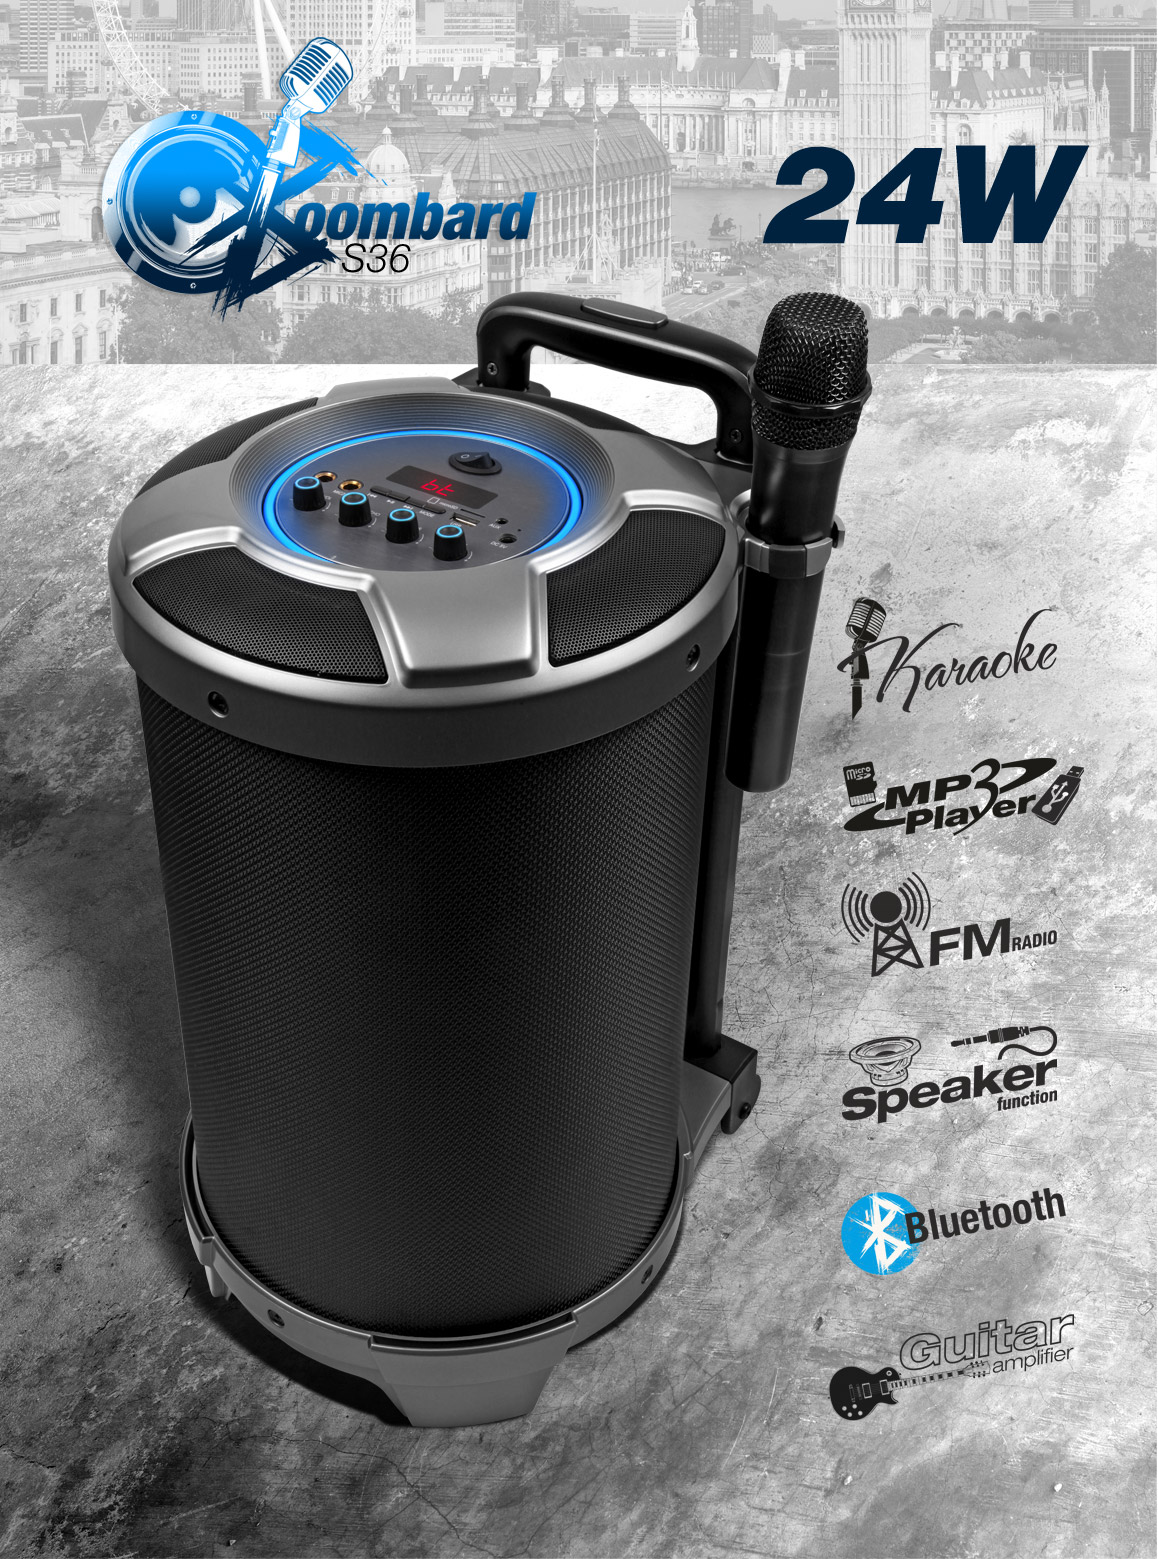 XX.Y Boombard - power audio system